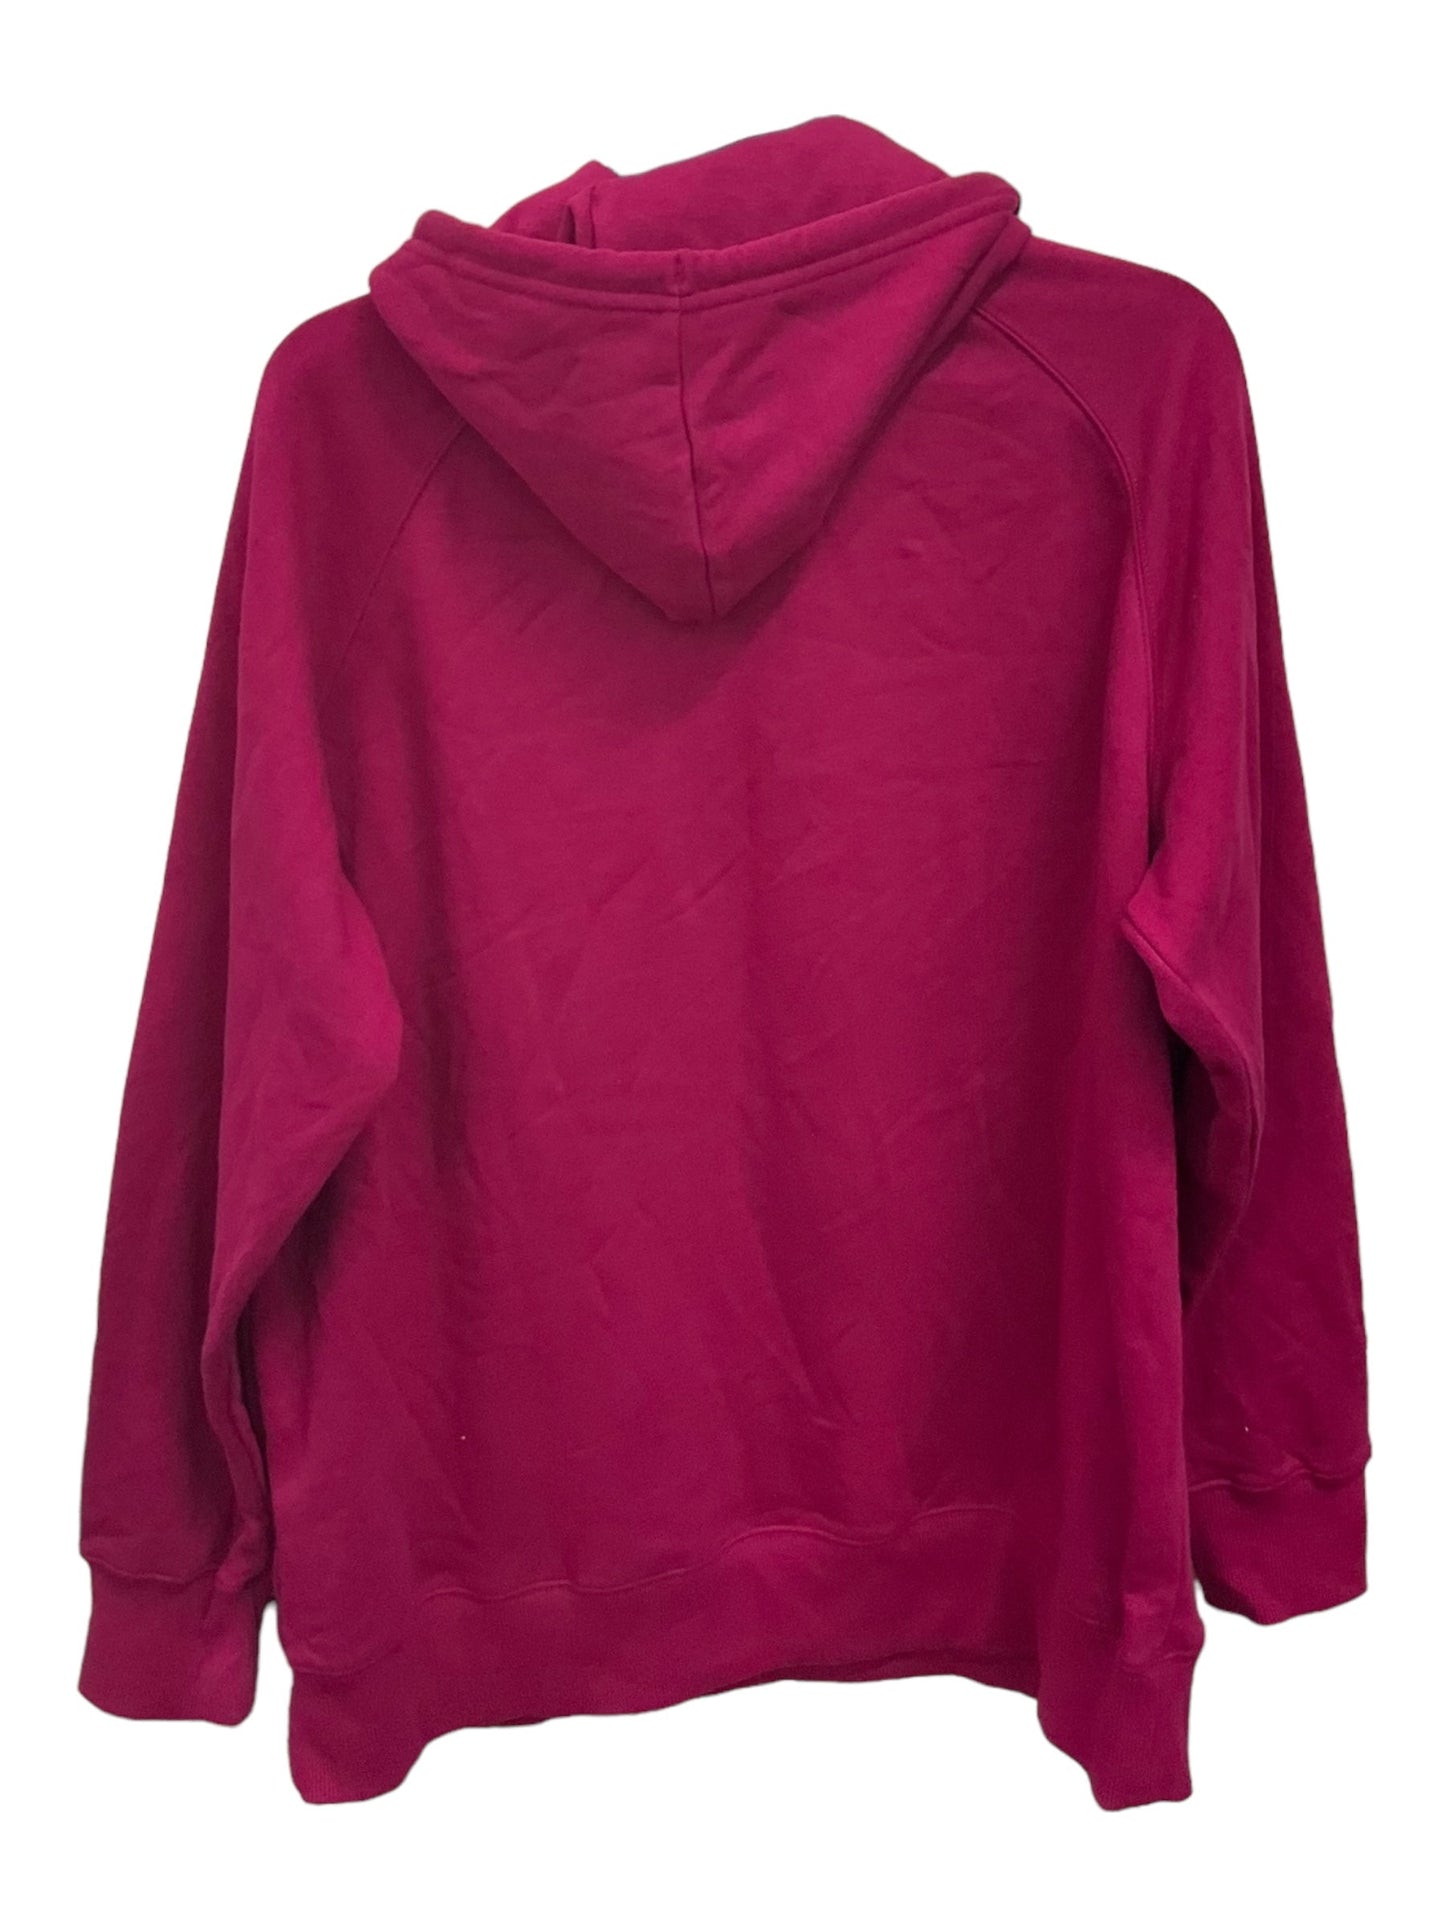 Pink Athletic Top Long Sleeve Hoodie The North Face, Size Xl